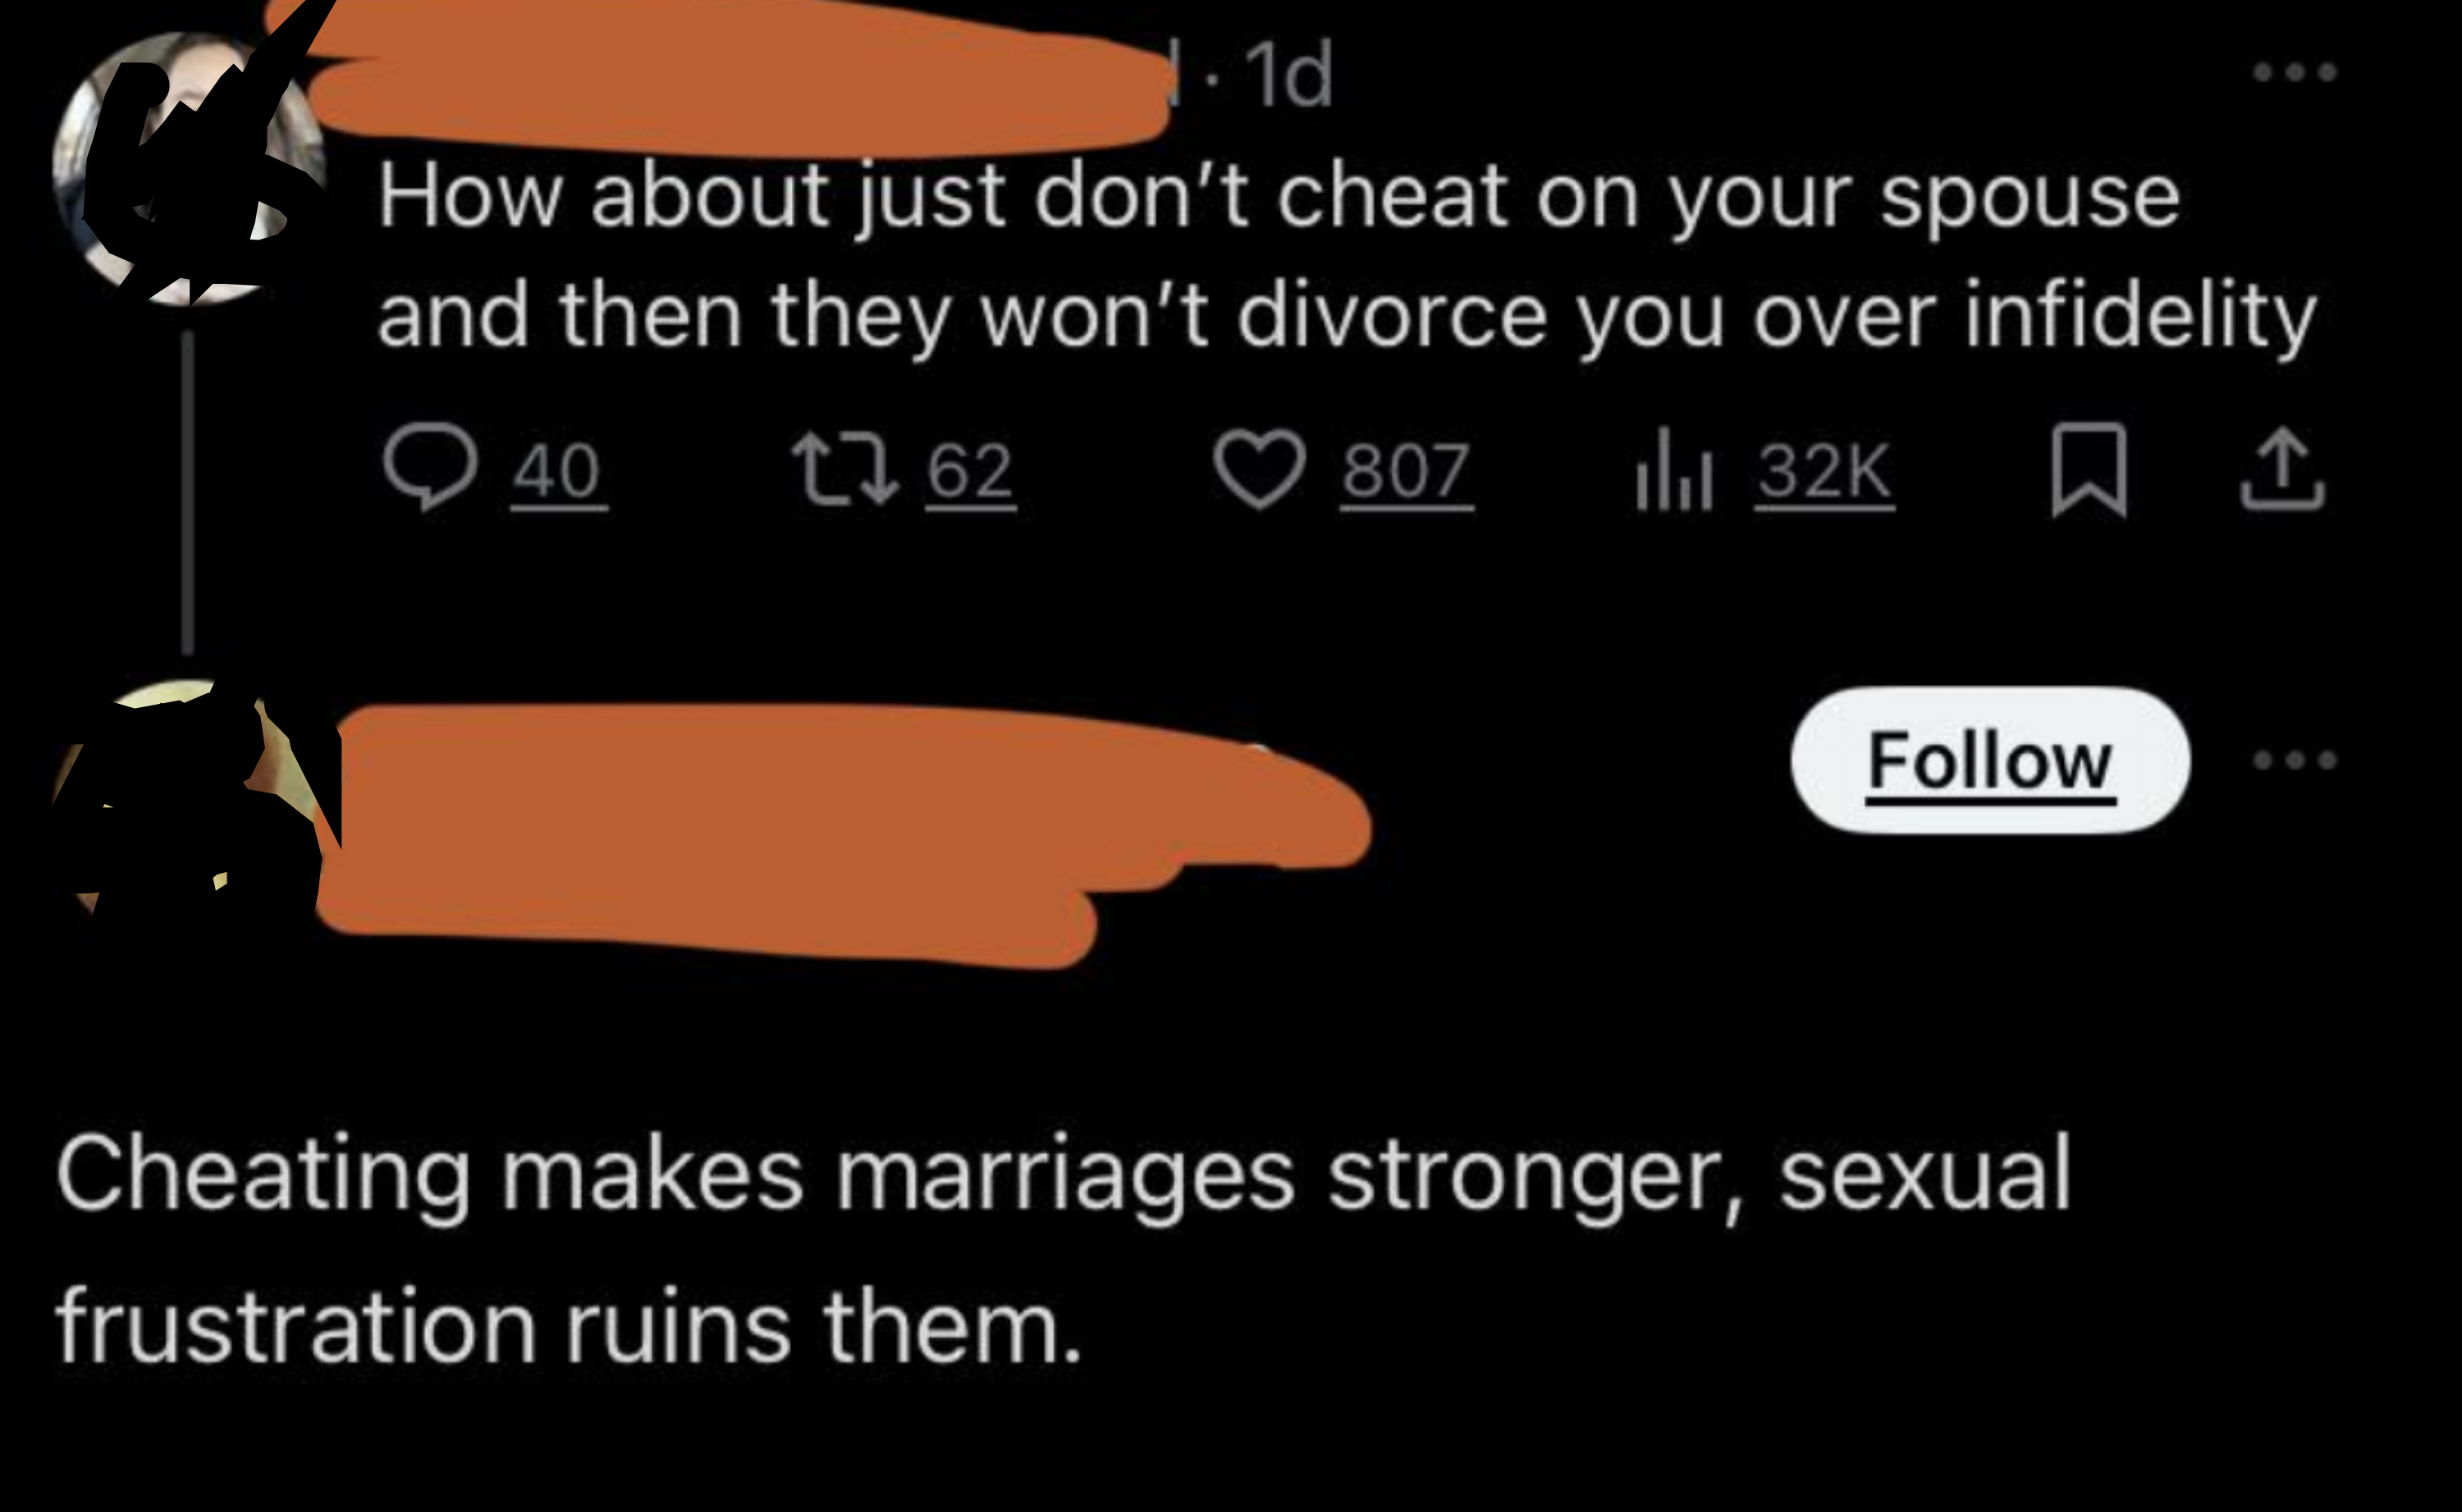 &quot;Cheating makes marriages stronger&quot;